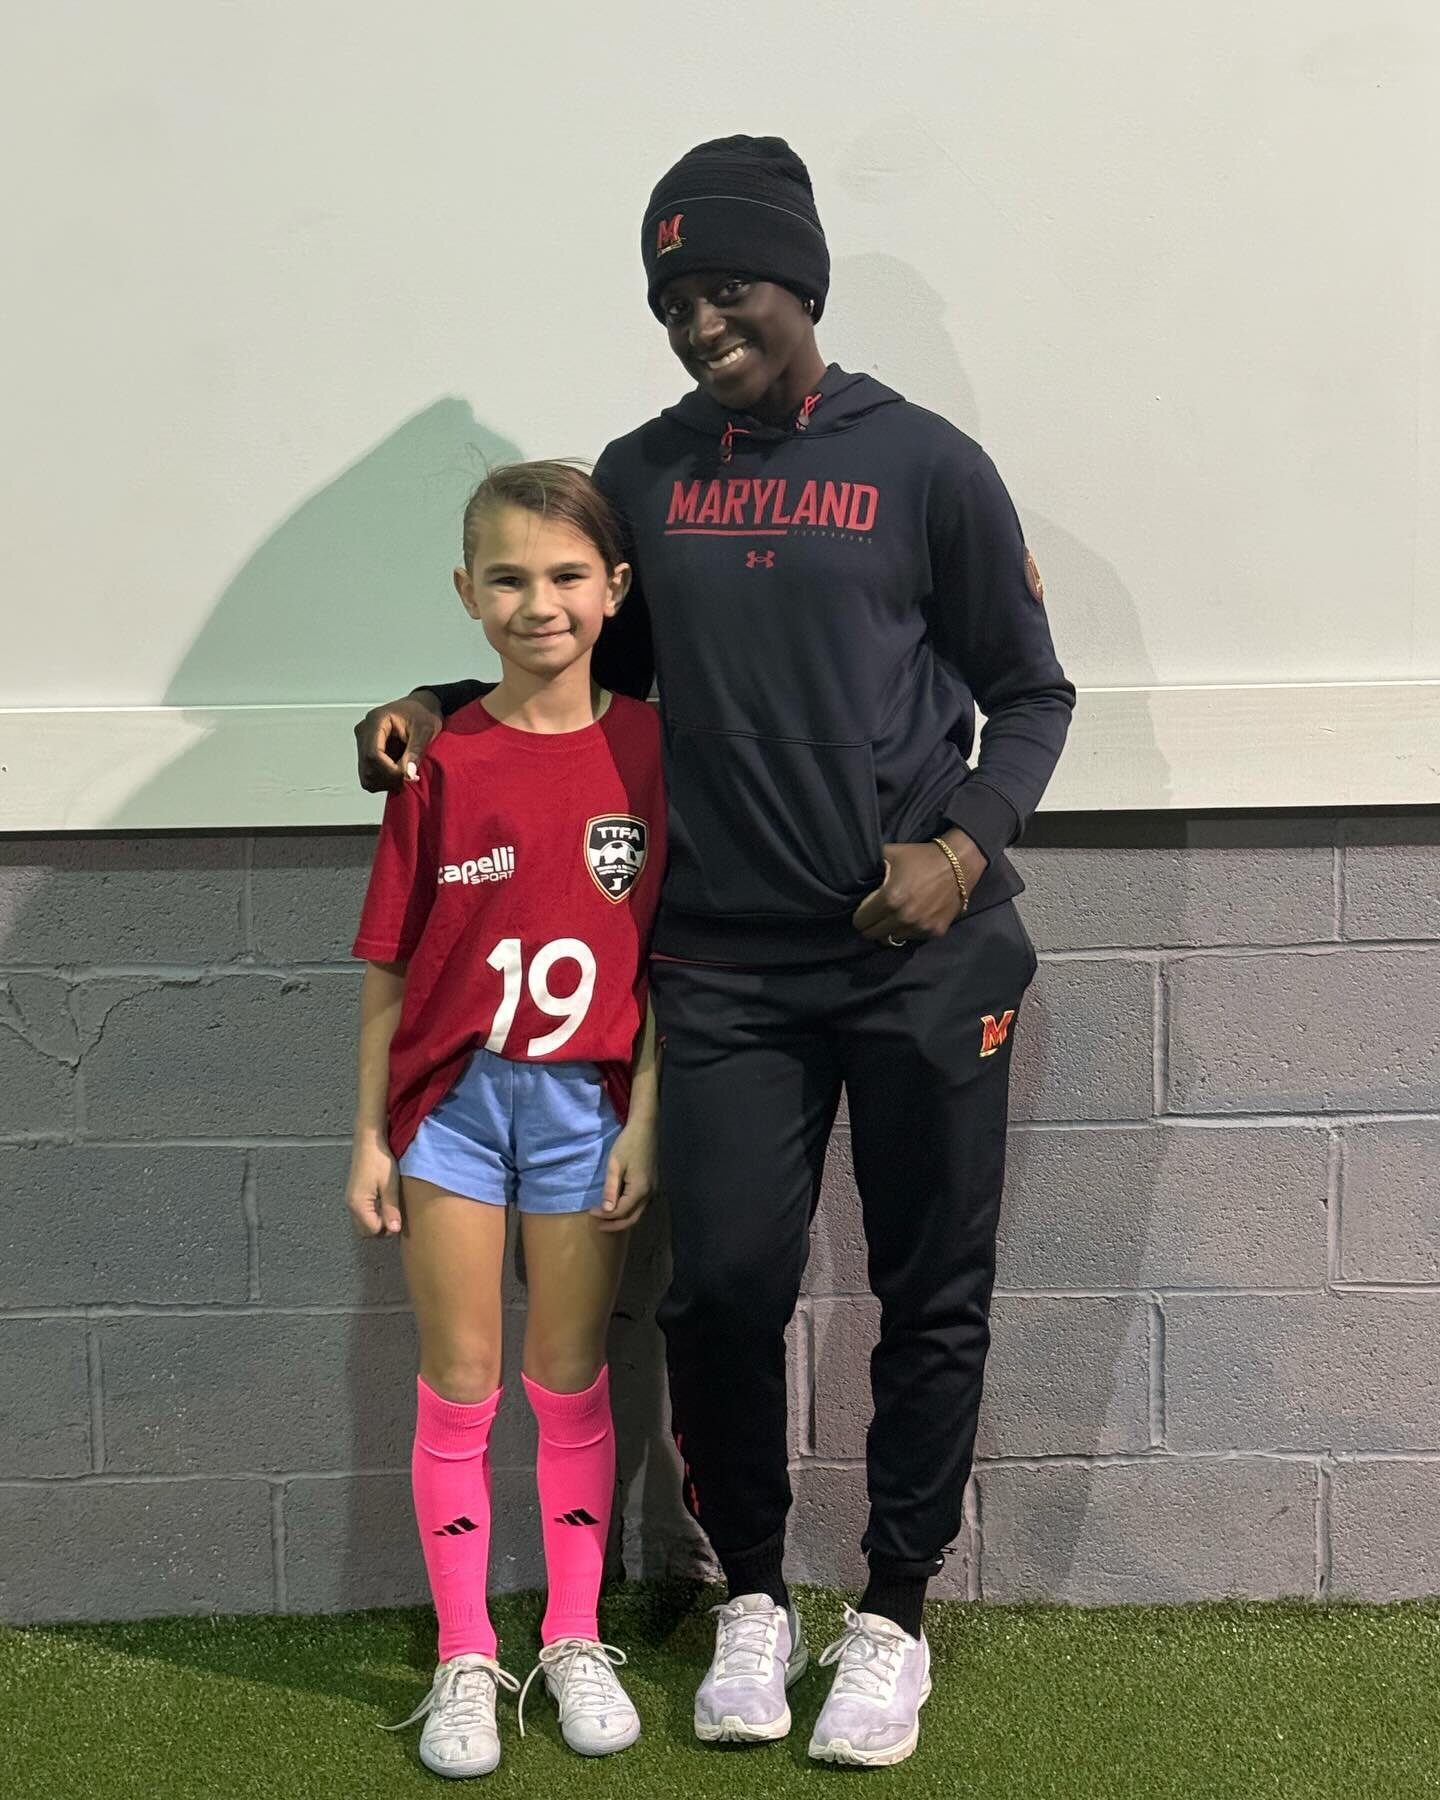 Last week, @04aurorahill had spirit week at school to celebrate black history month. The theme was to pick a jersey to support African Americans in sports, and guess who she chose! Coach Christa! Aurora has been training with Coach Christa on Thursda